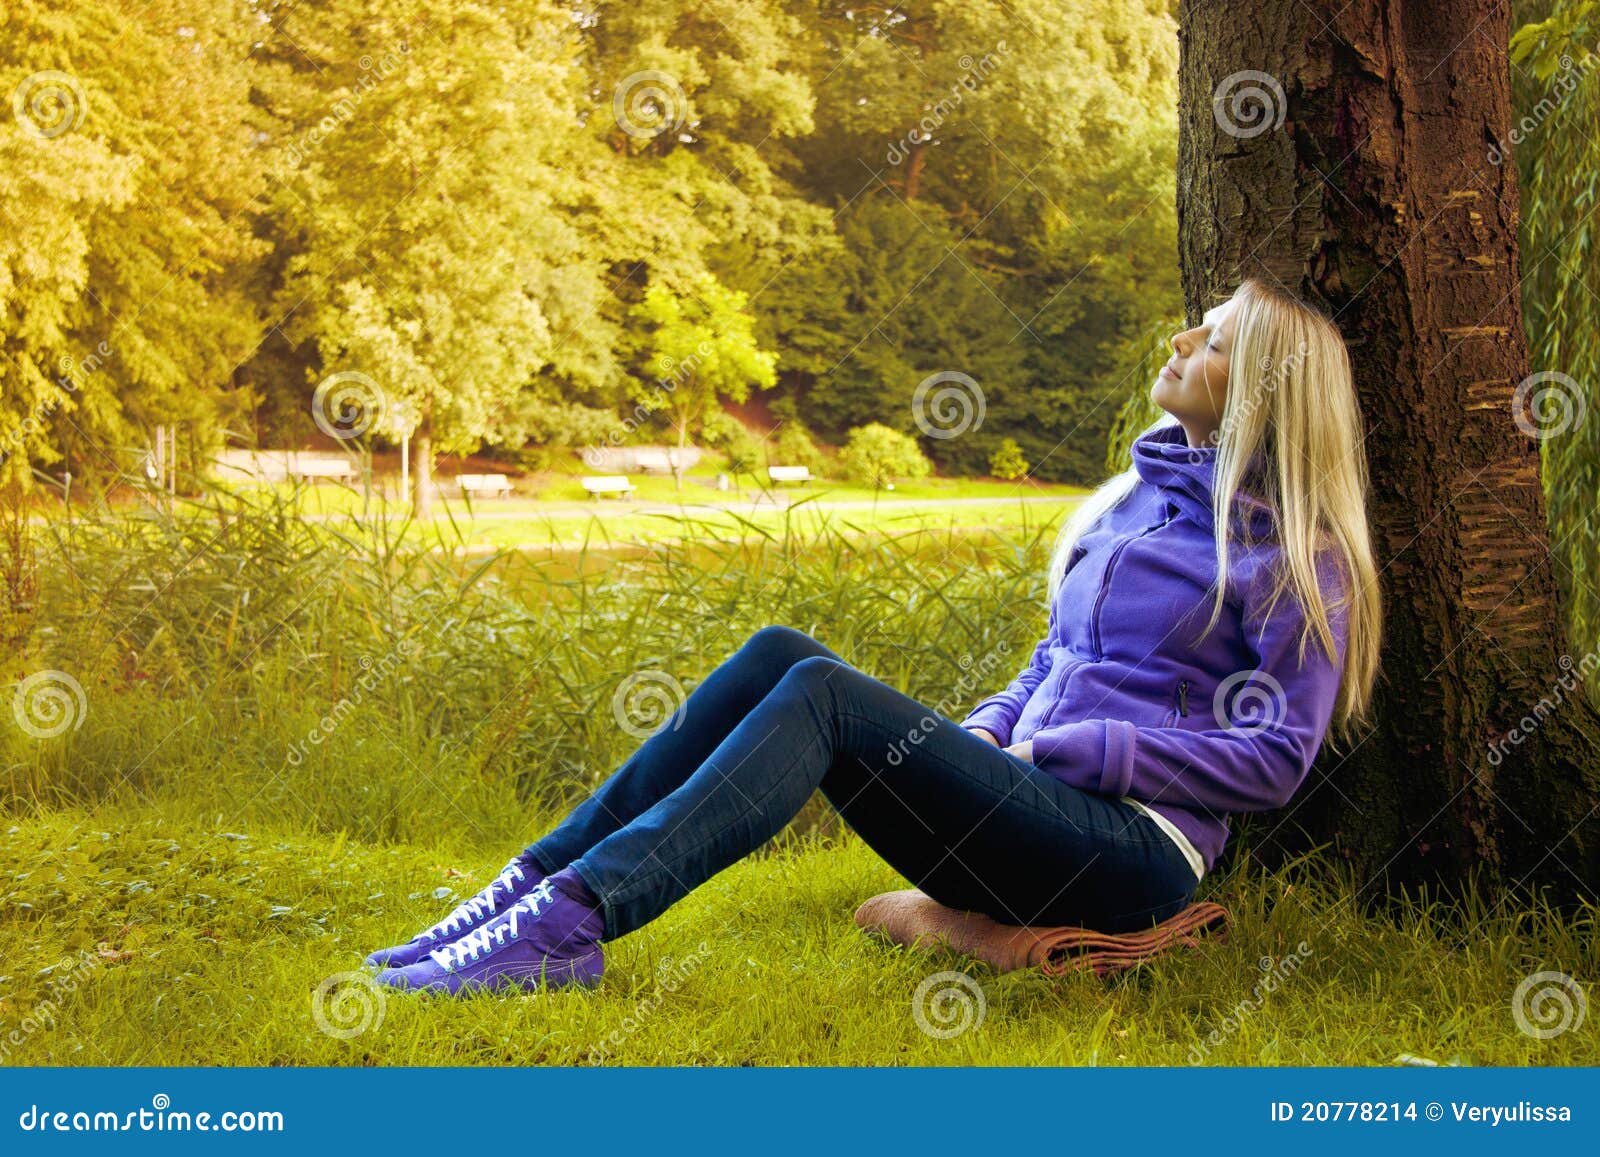 Young Woman Sitting Under a Tree Stock Photo - Image of happy, gold ...